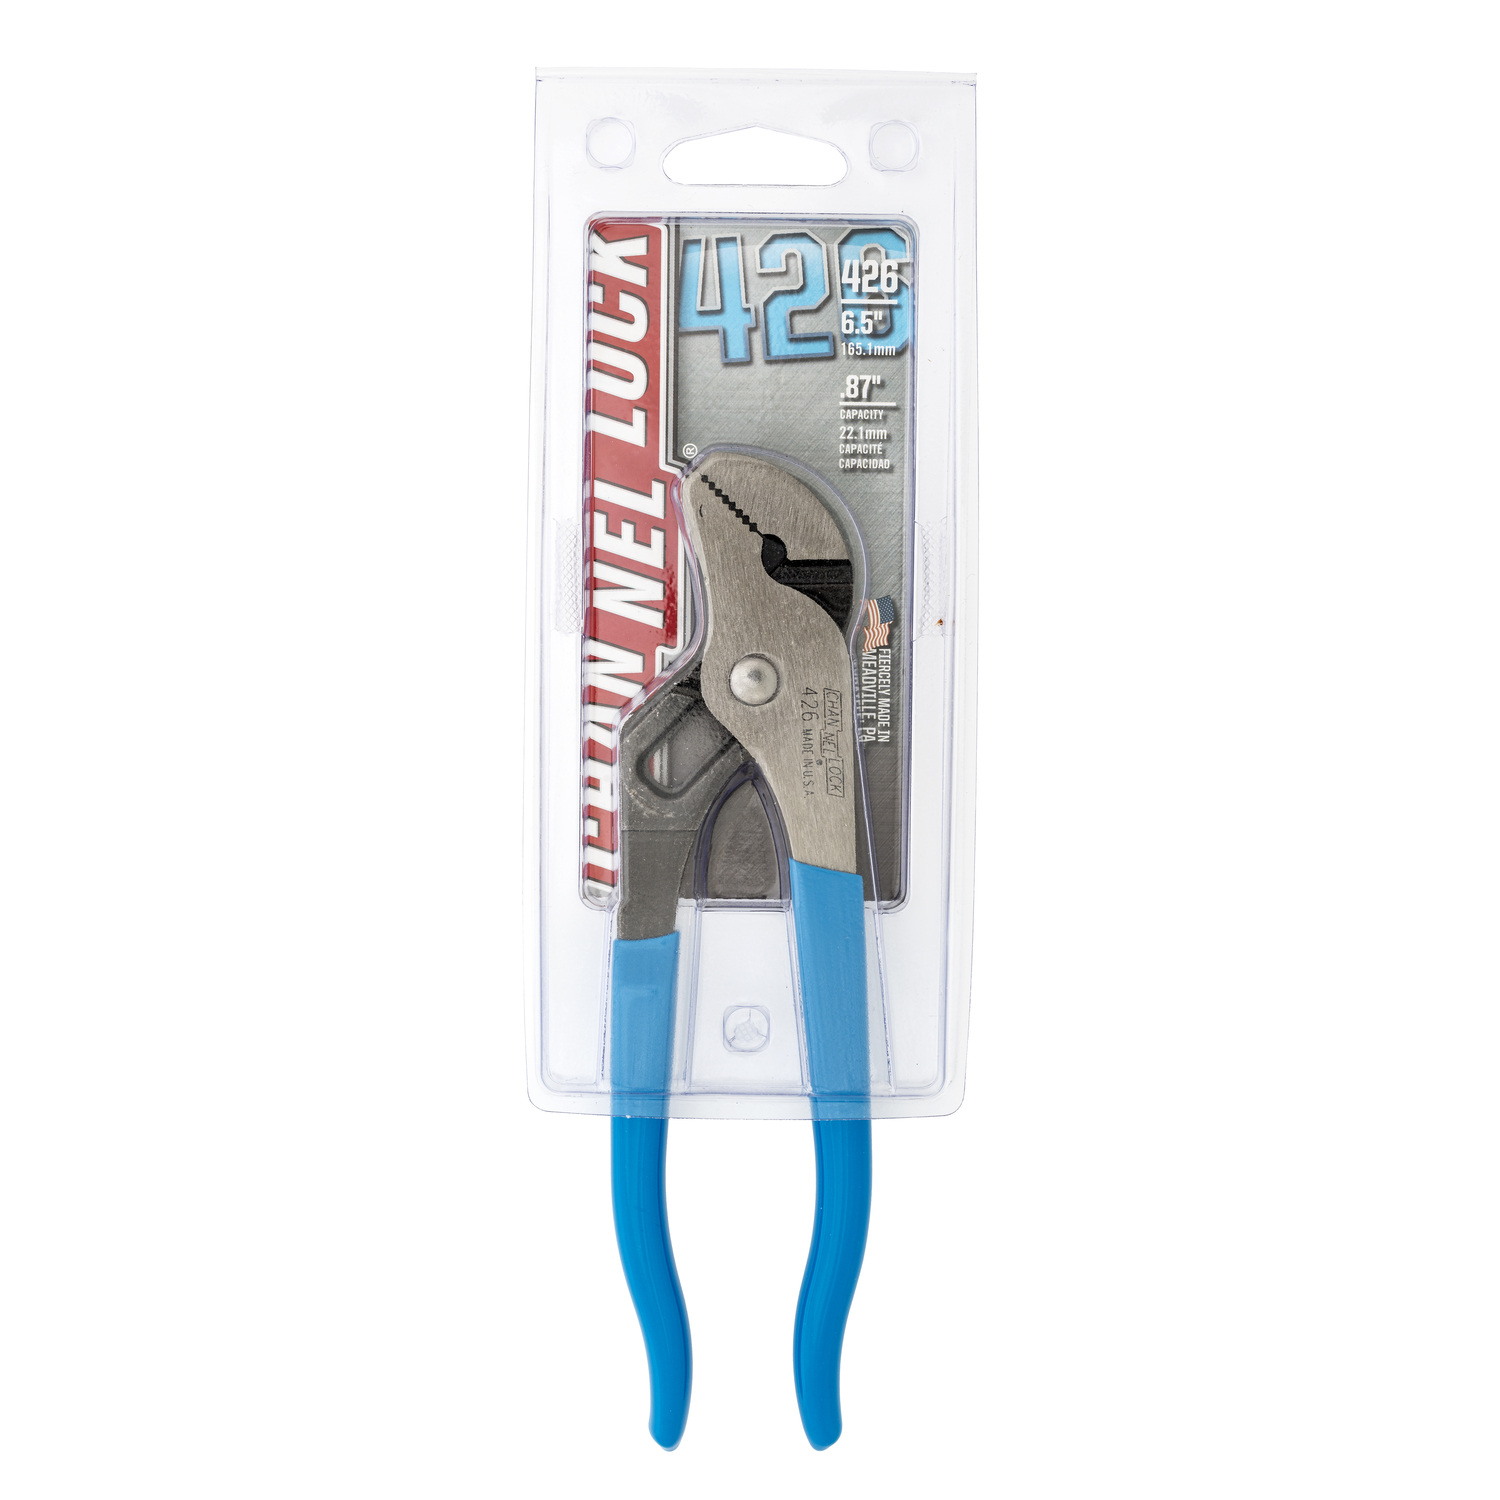 Channellock 6.5 in. Carbon Steel Straight Jaw Tongue and Groove Pliers